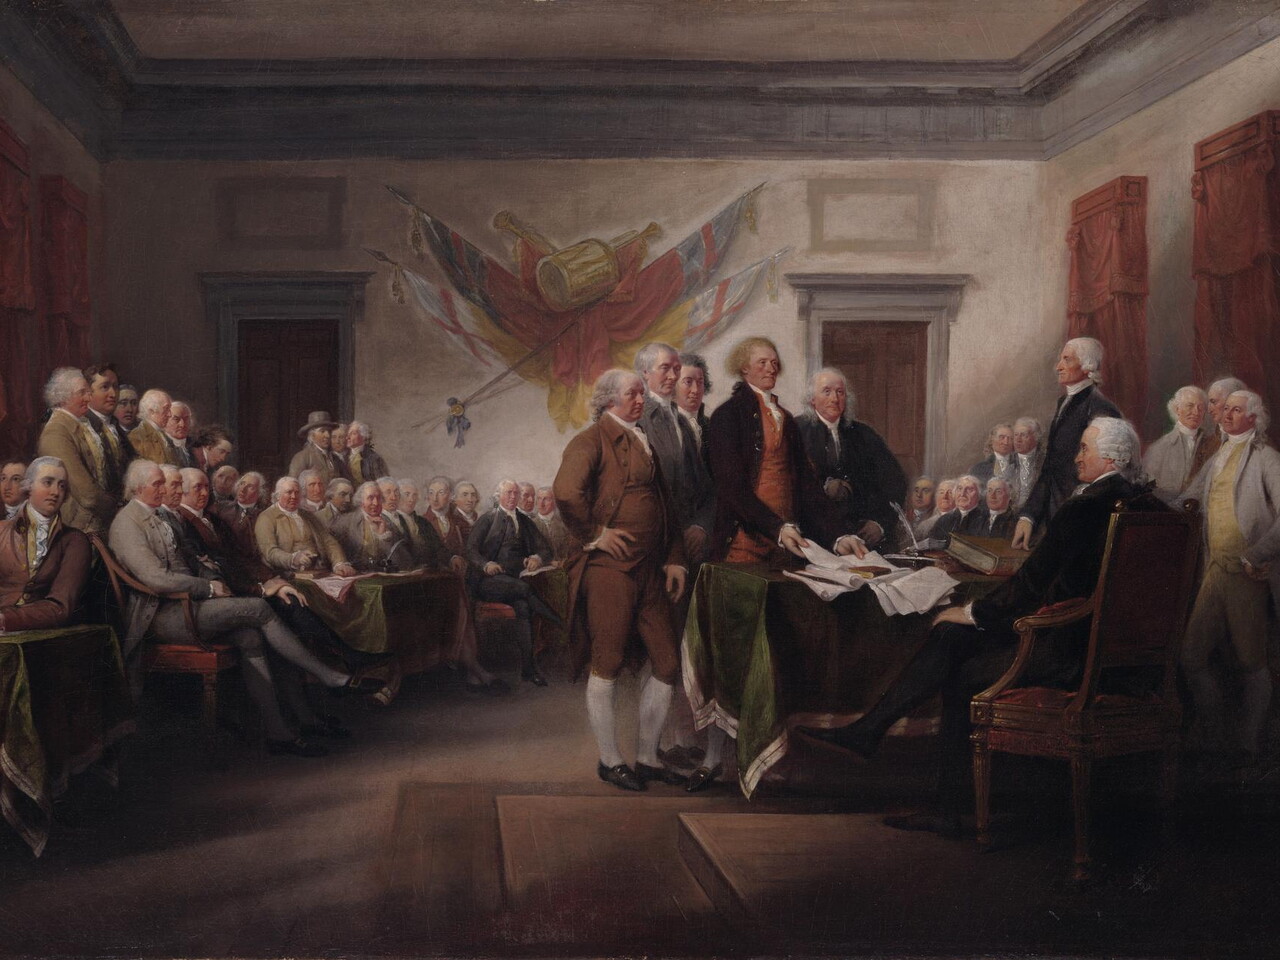 Painting of the signers of the Declaration of Independence